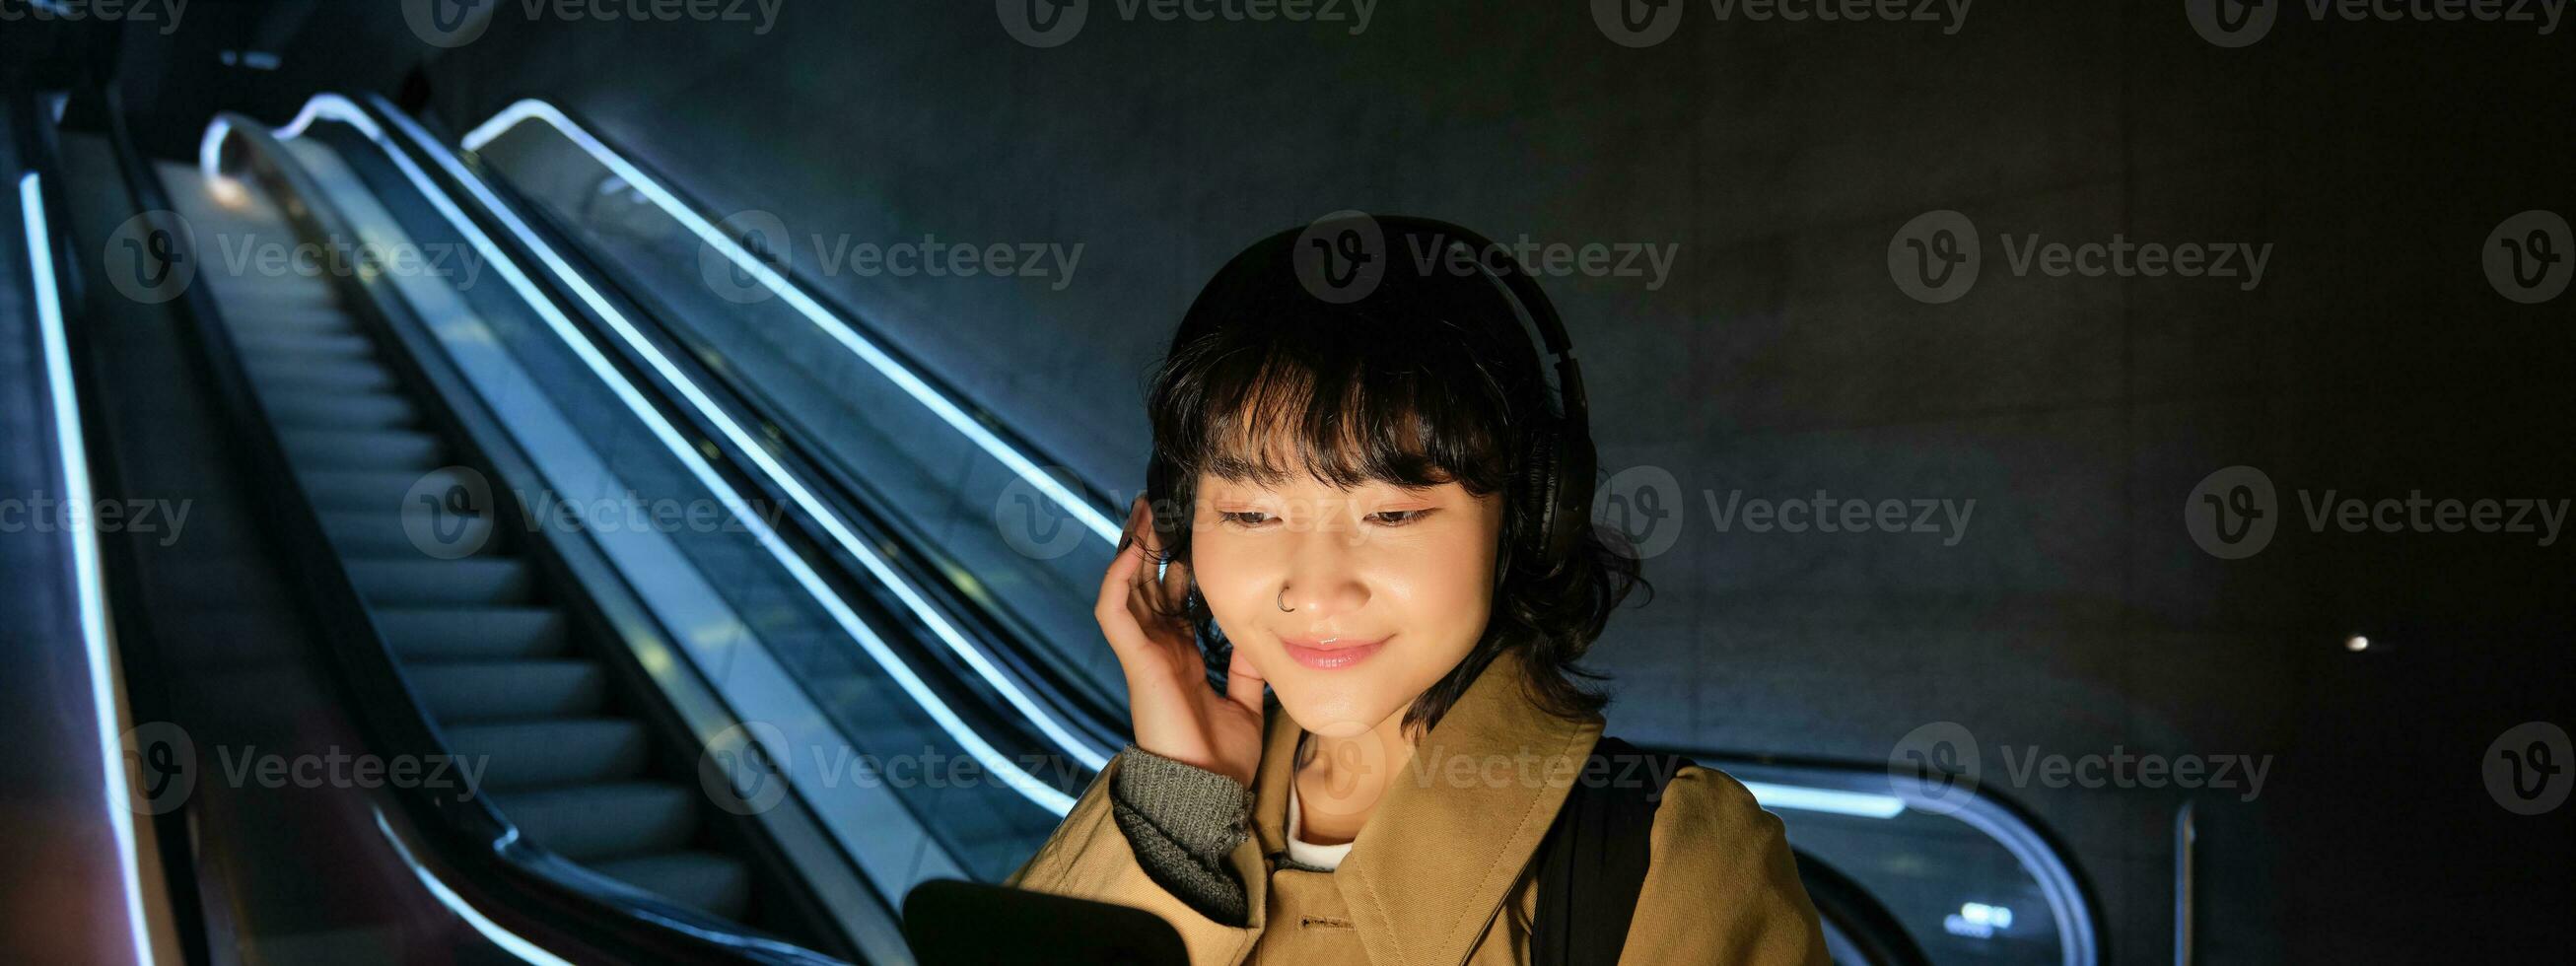 Cute young student, girl in headphones, commuting, standing near escalator, holding smartphone, listening music or podcast while travelling in city photo